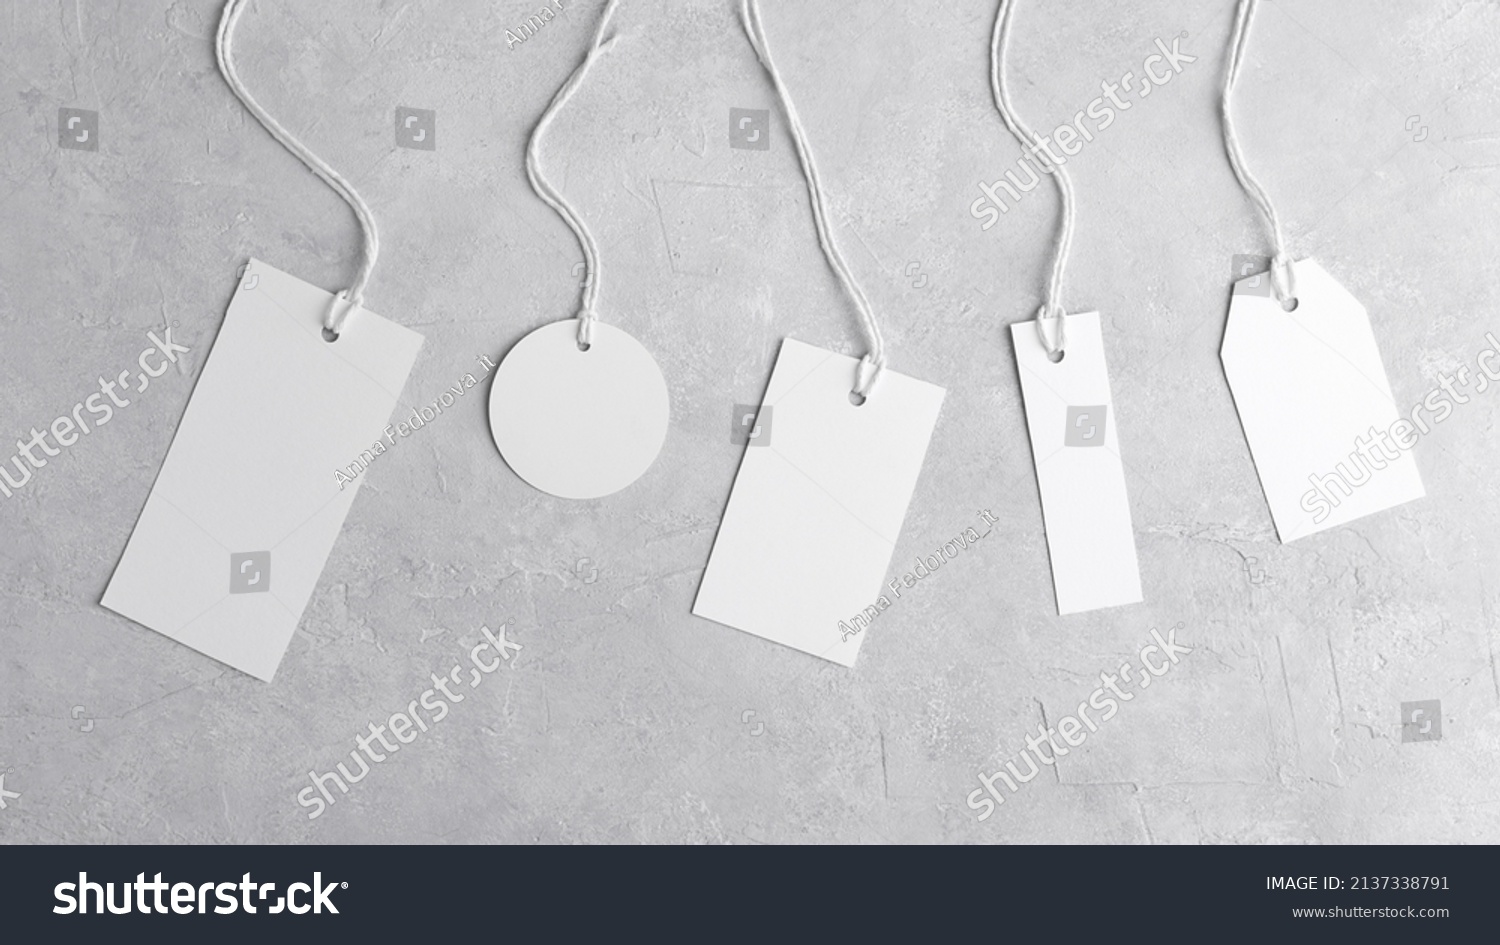 Round tag mockup, rectangle tag mockup, strip tag mockup with white cord, close up. Various price cardboard labels on grey background. Blank empty paper product tags, sale and black friday concept #2137338791